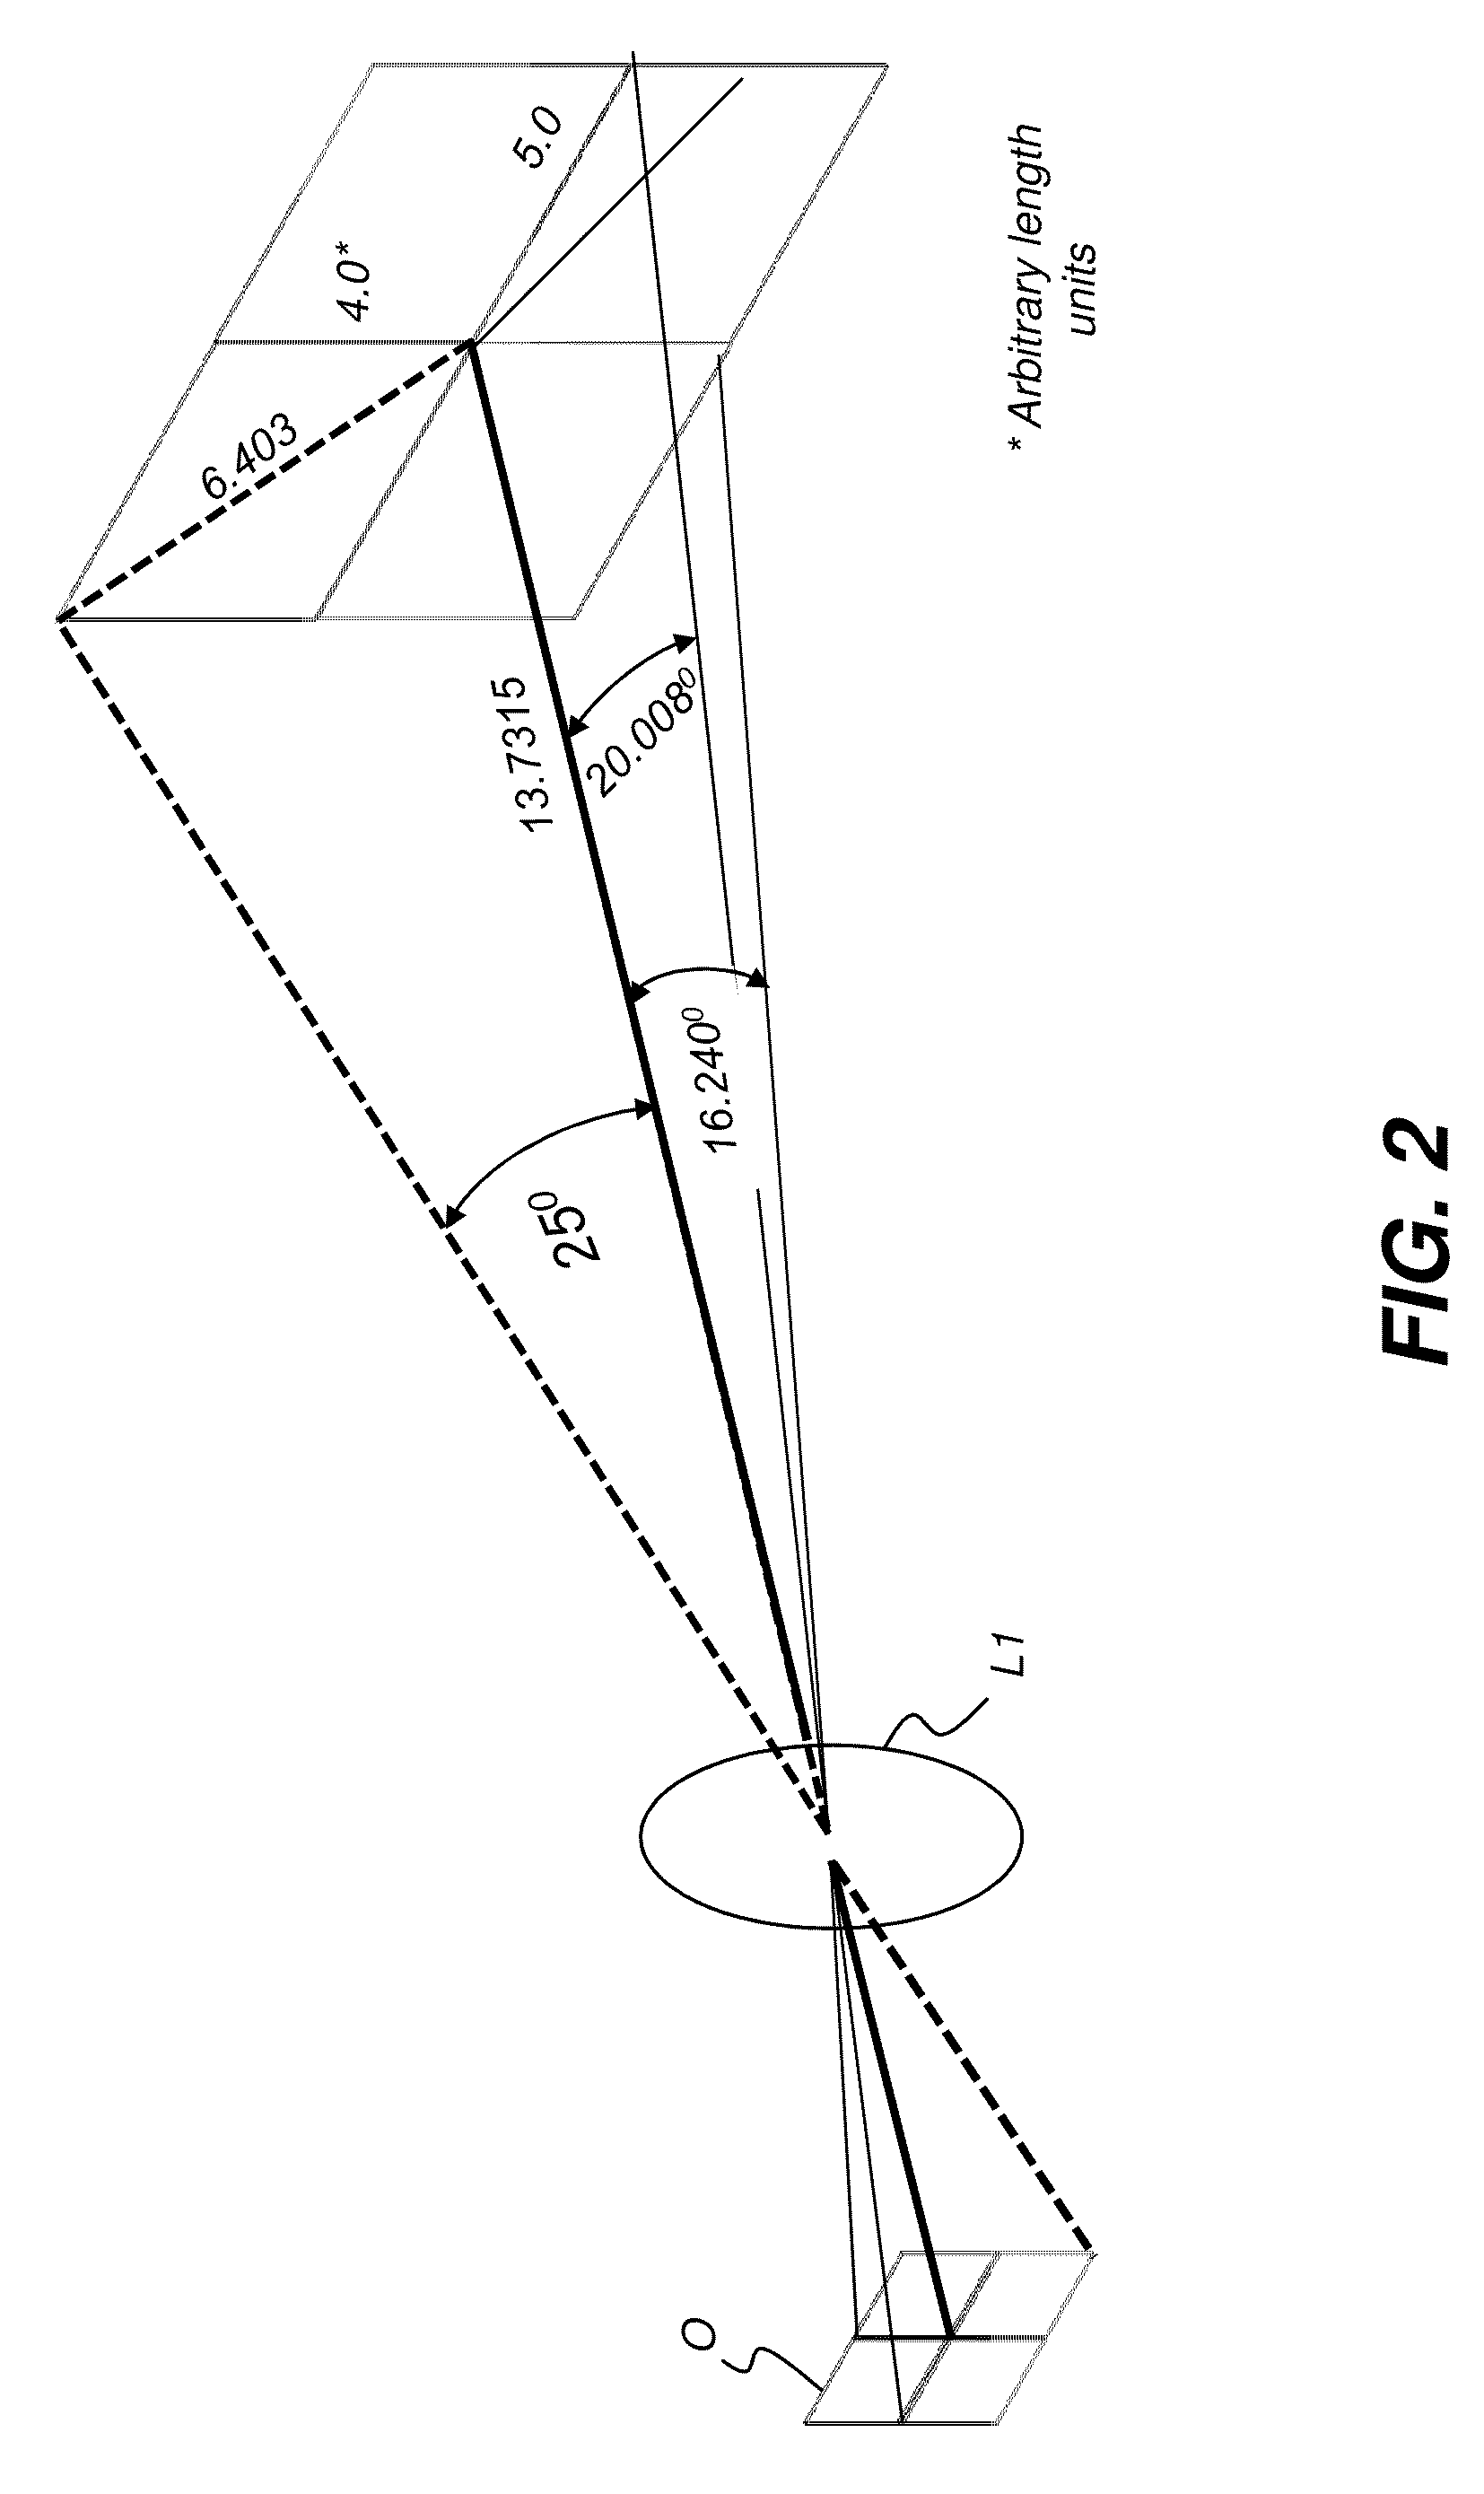 Head-mounted optical apparatus using an OLED display